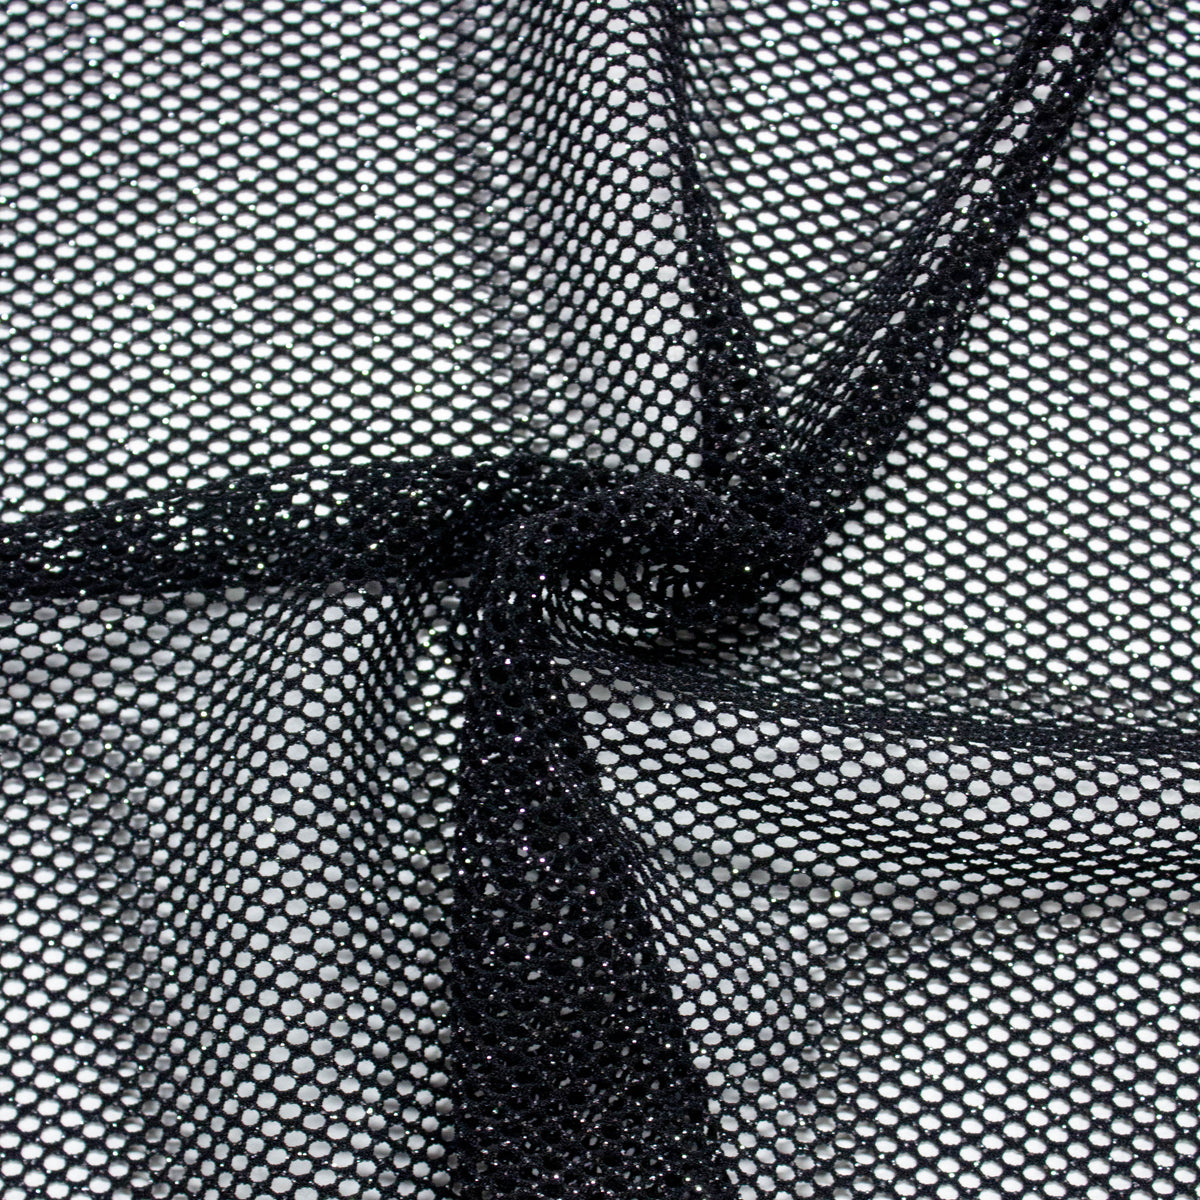 Lee Black Polyester Netting Silver Sparkling